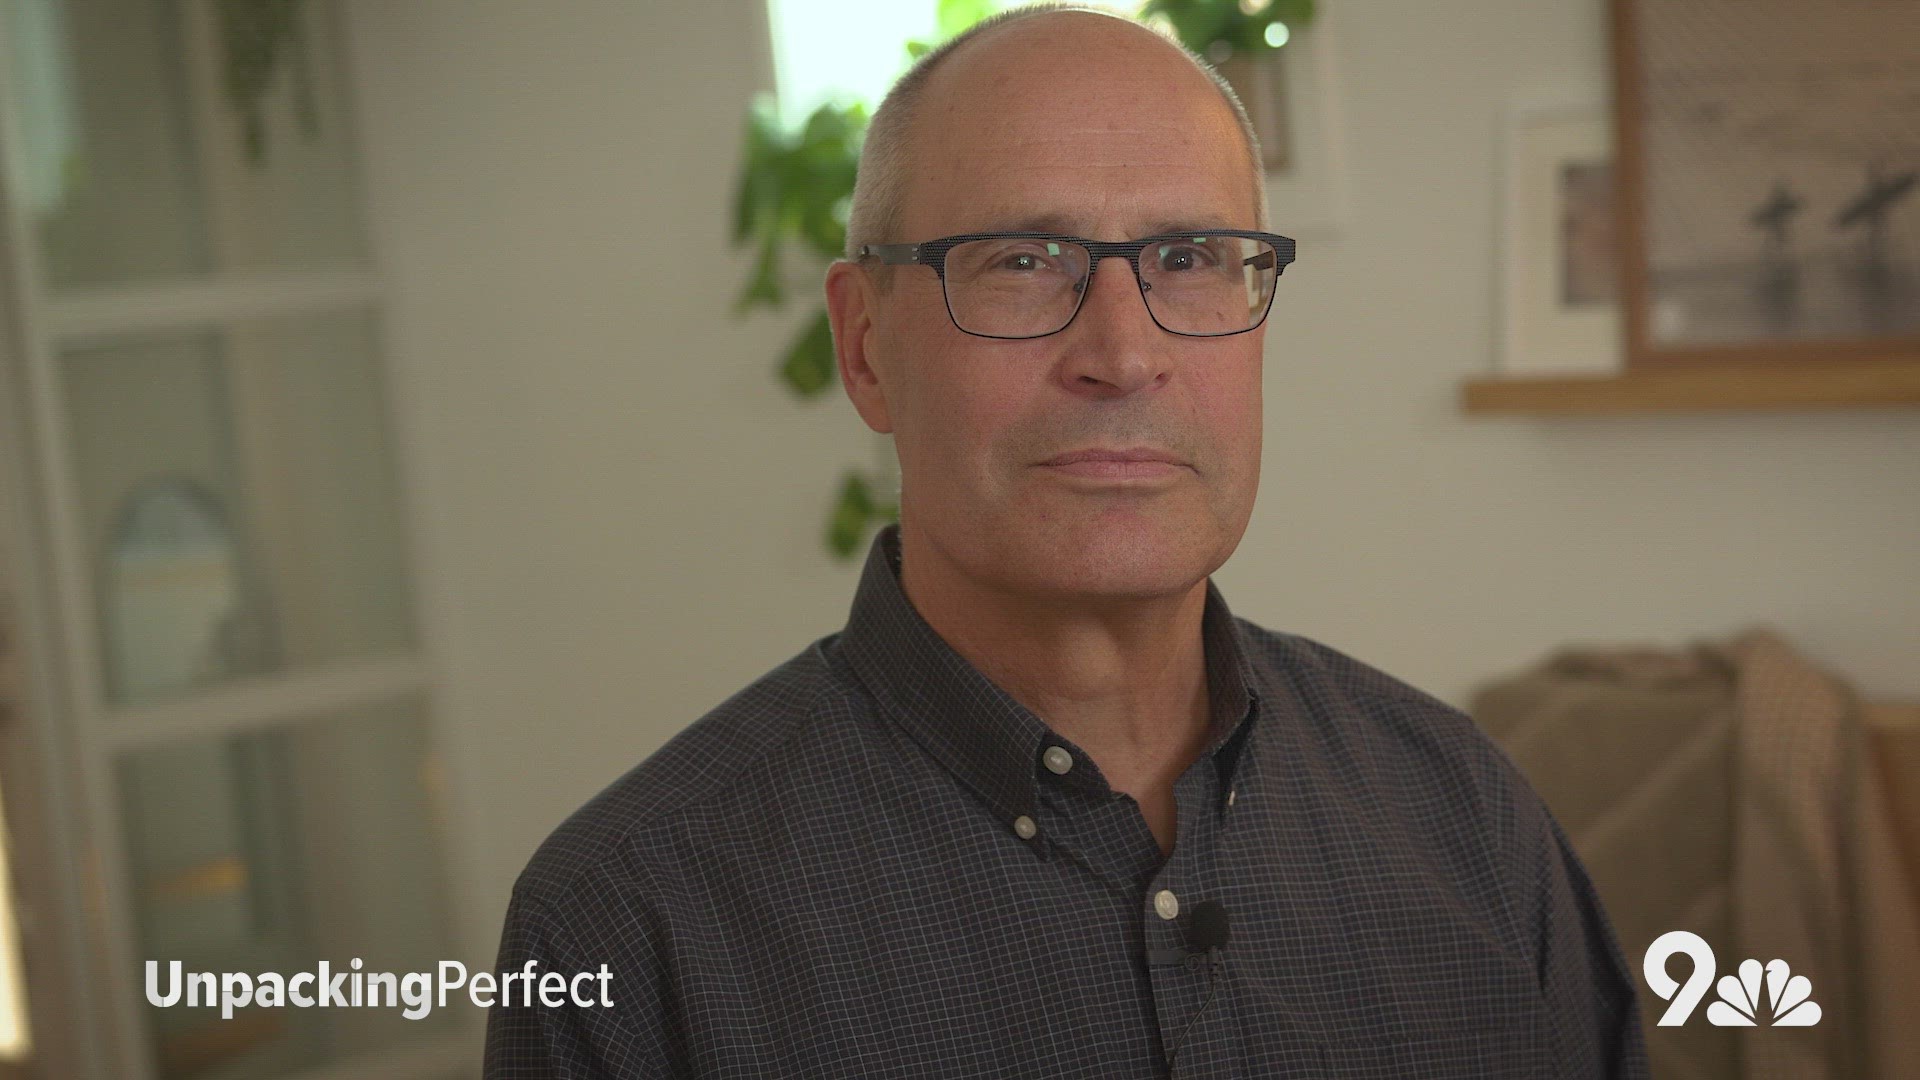 Glenn recently sat down with 9NEWS and Unpacking Perfect to share his story of mental wellness, and how he has pushed aside the ideals of perfection.